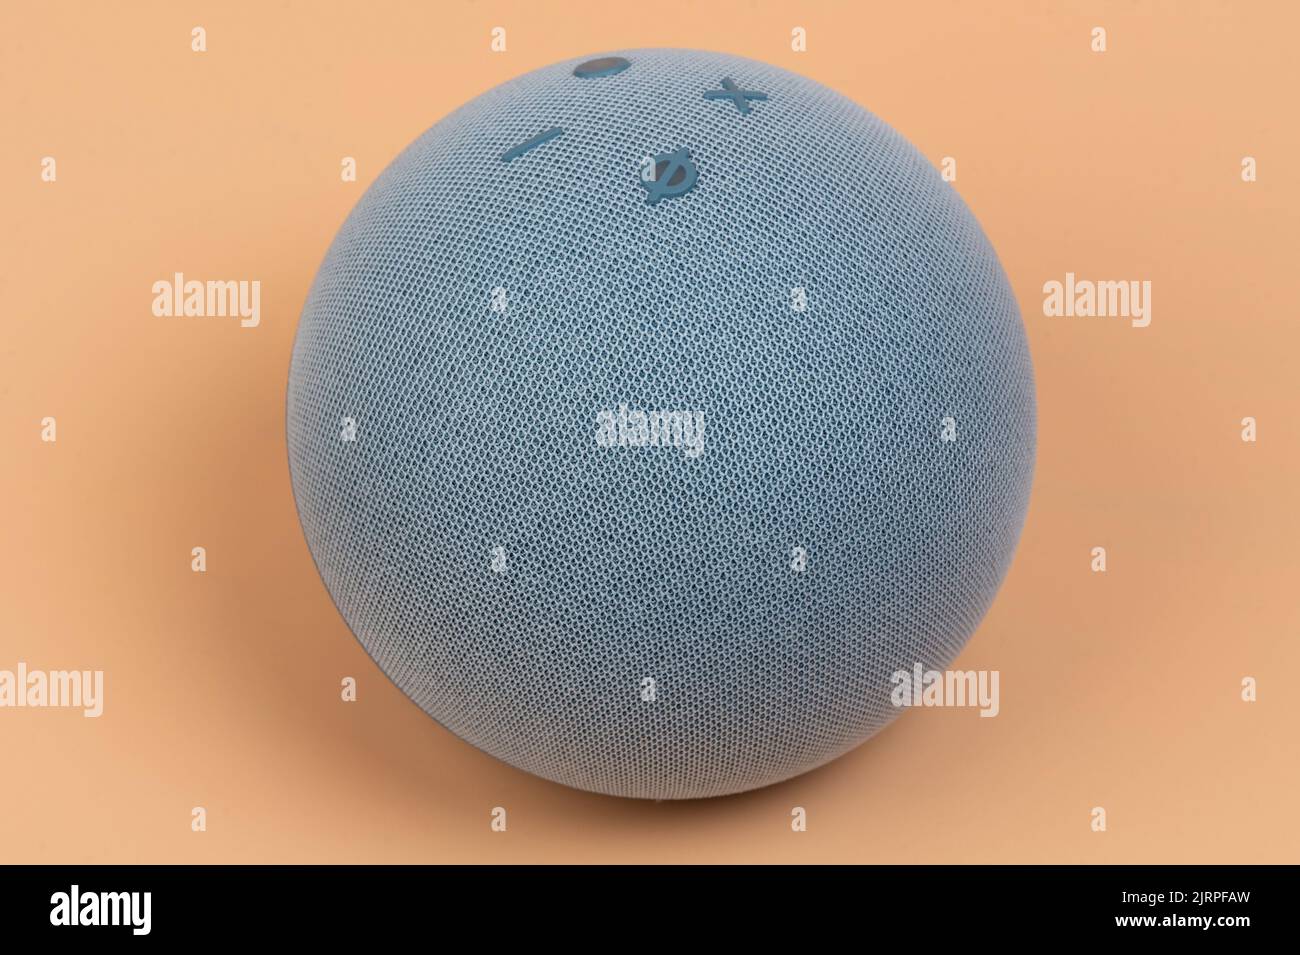 New york, USA - july 12, 2022: Amazon Alexa echo dot speaker with buttons close up view Stock Photo